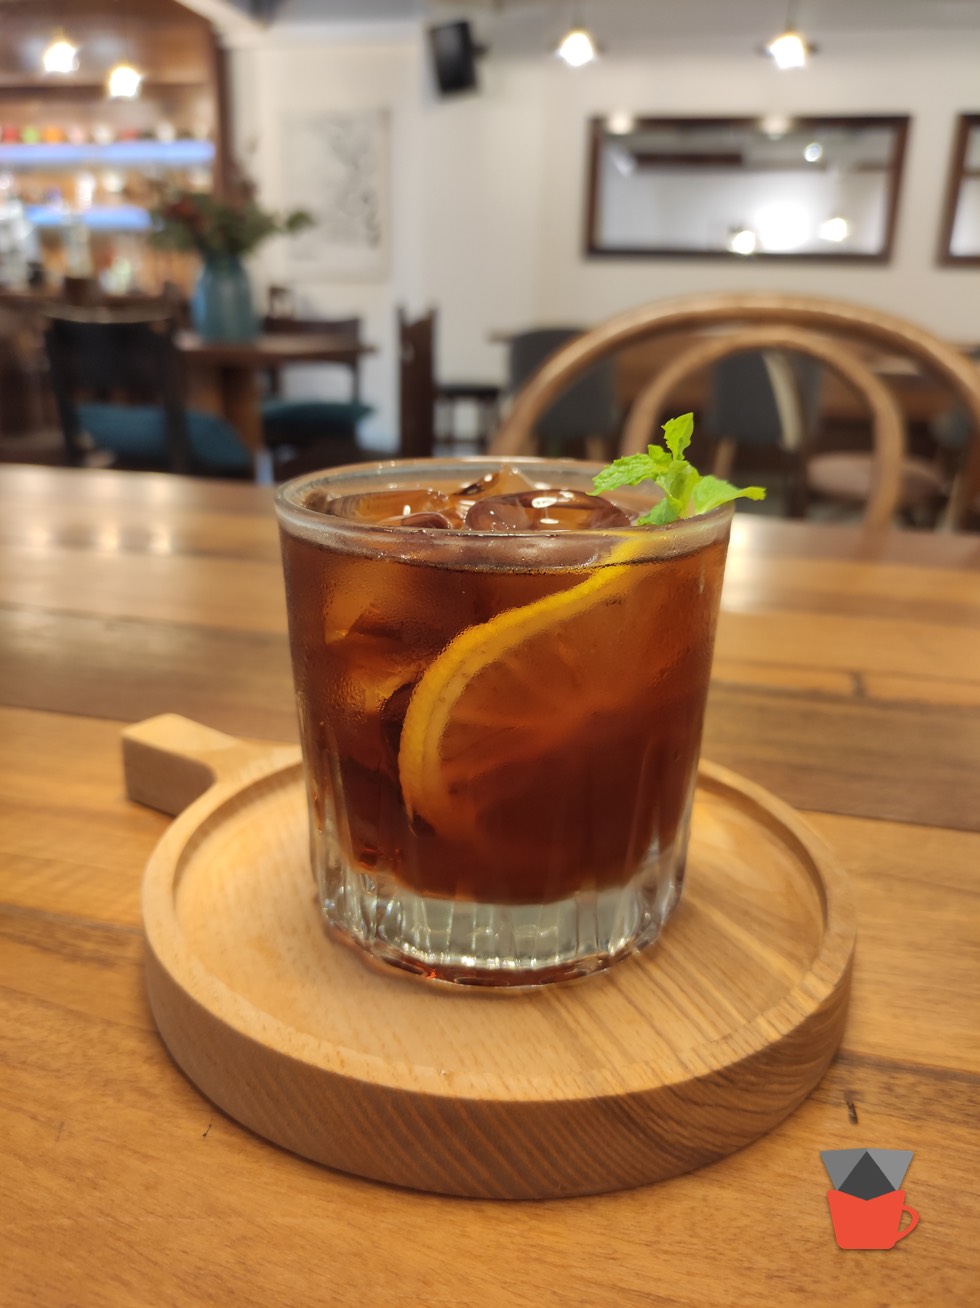 OCT 25 2021: A well served cold brew coffee by Unihub Coffee